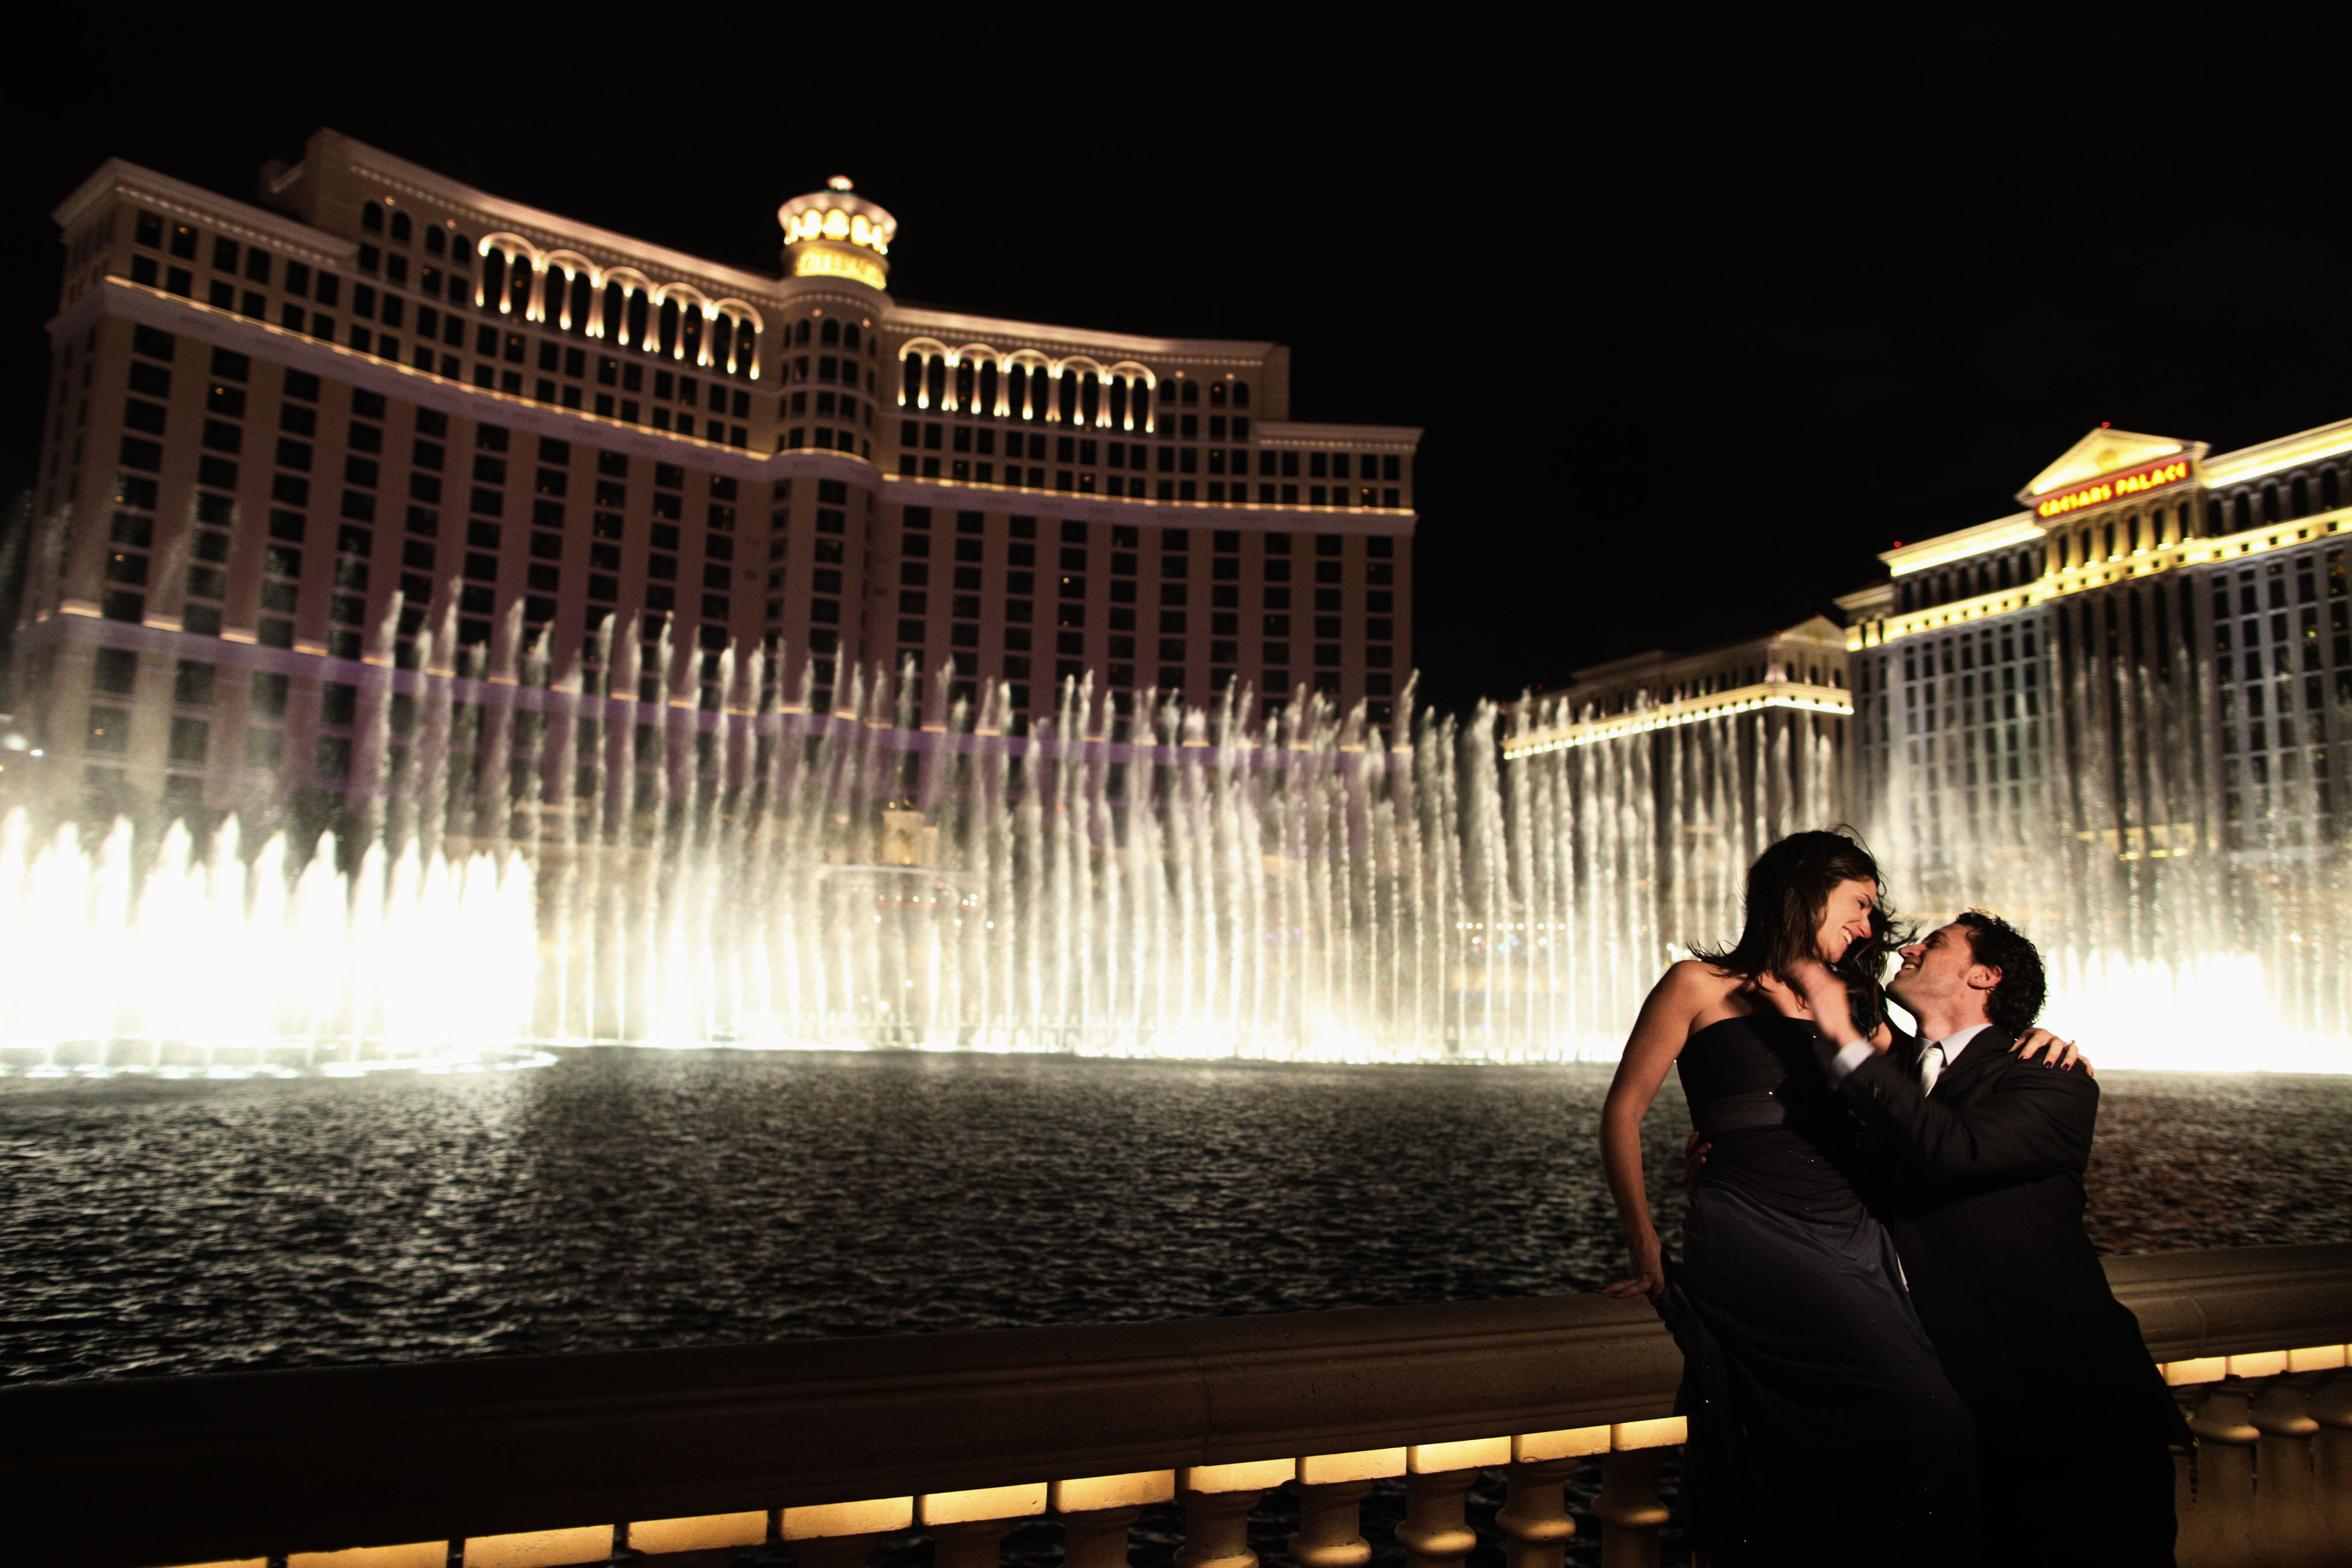 In front of the Bellagio